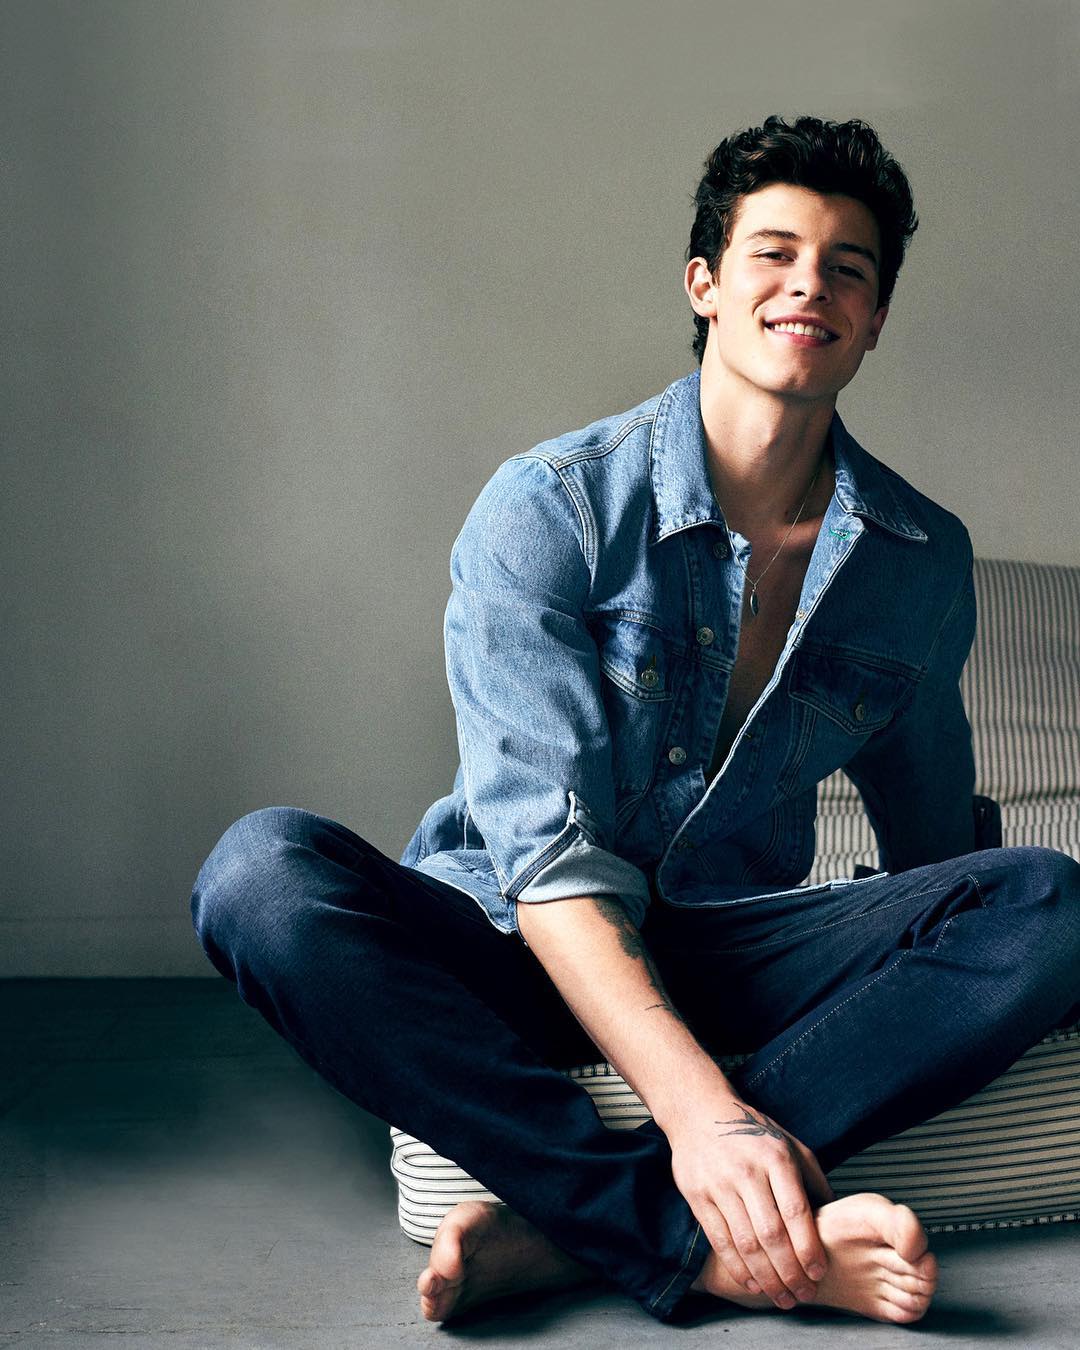 Shawn Mendes image Shawn Mendes HD wallpaper and background photo